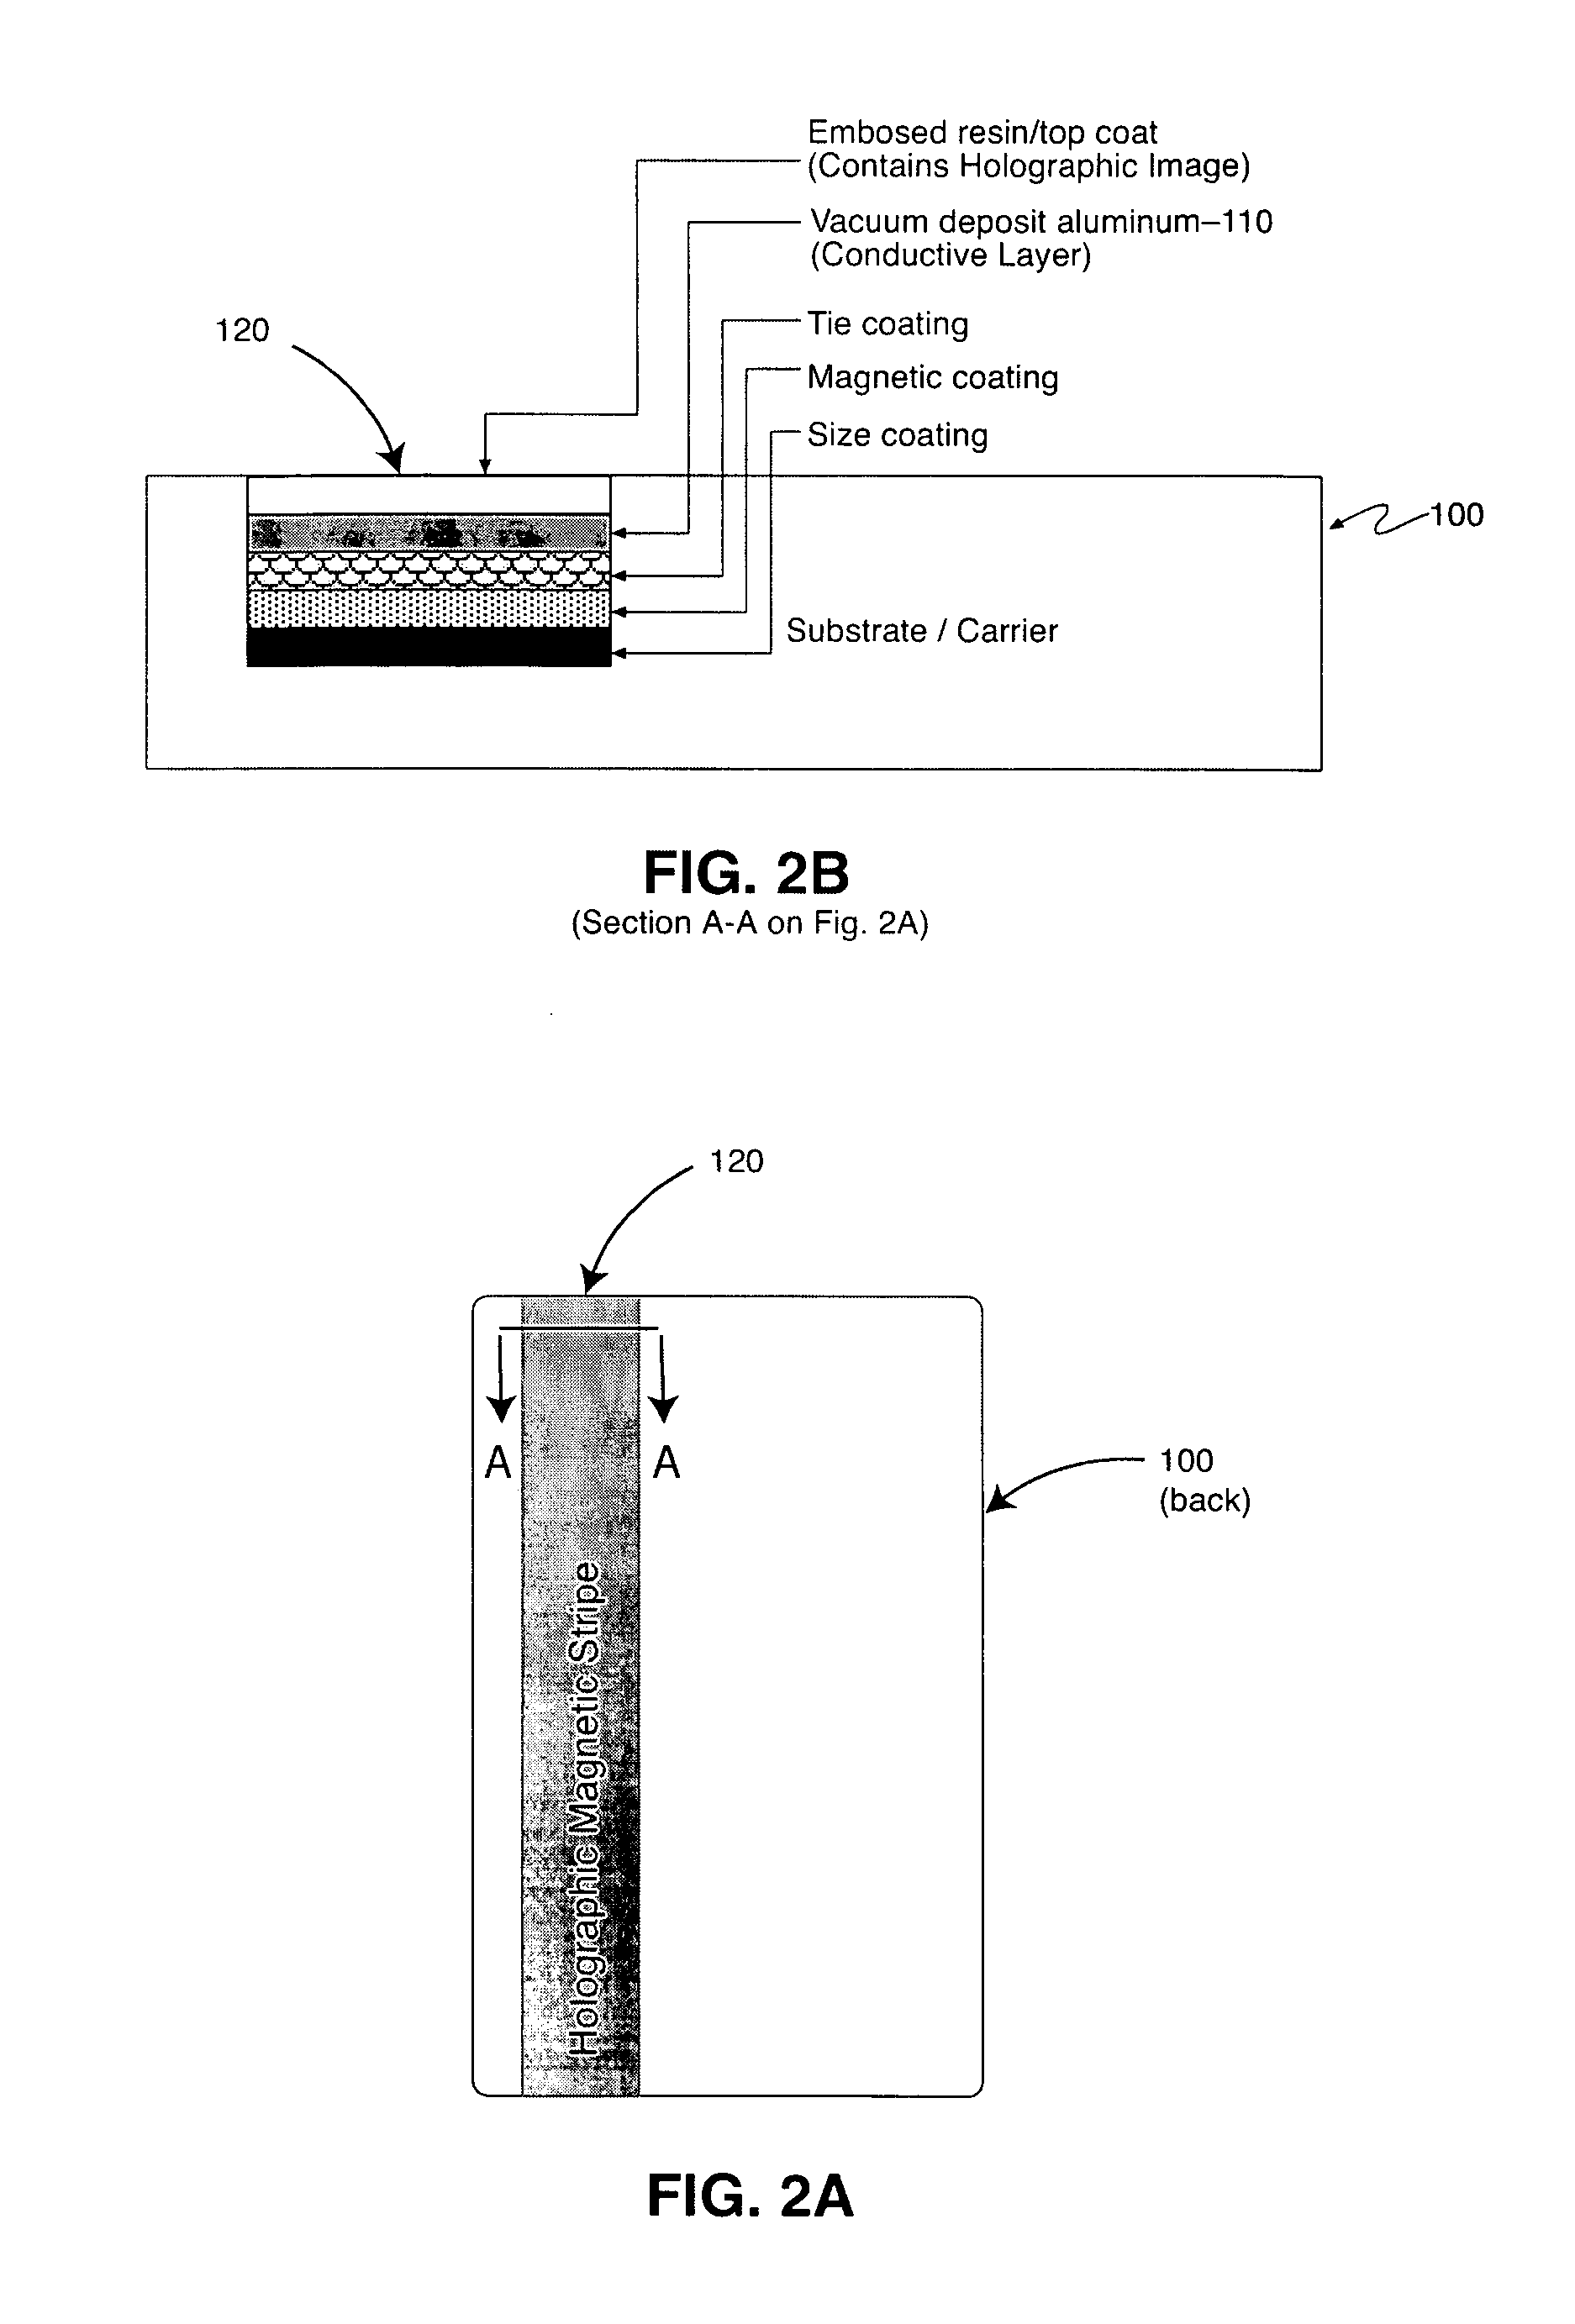 Method of reducing electro-static discharge (ESD) from conductors on insulators